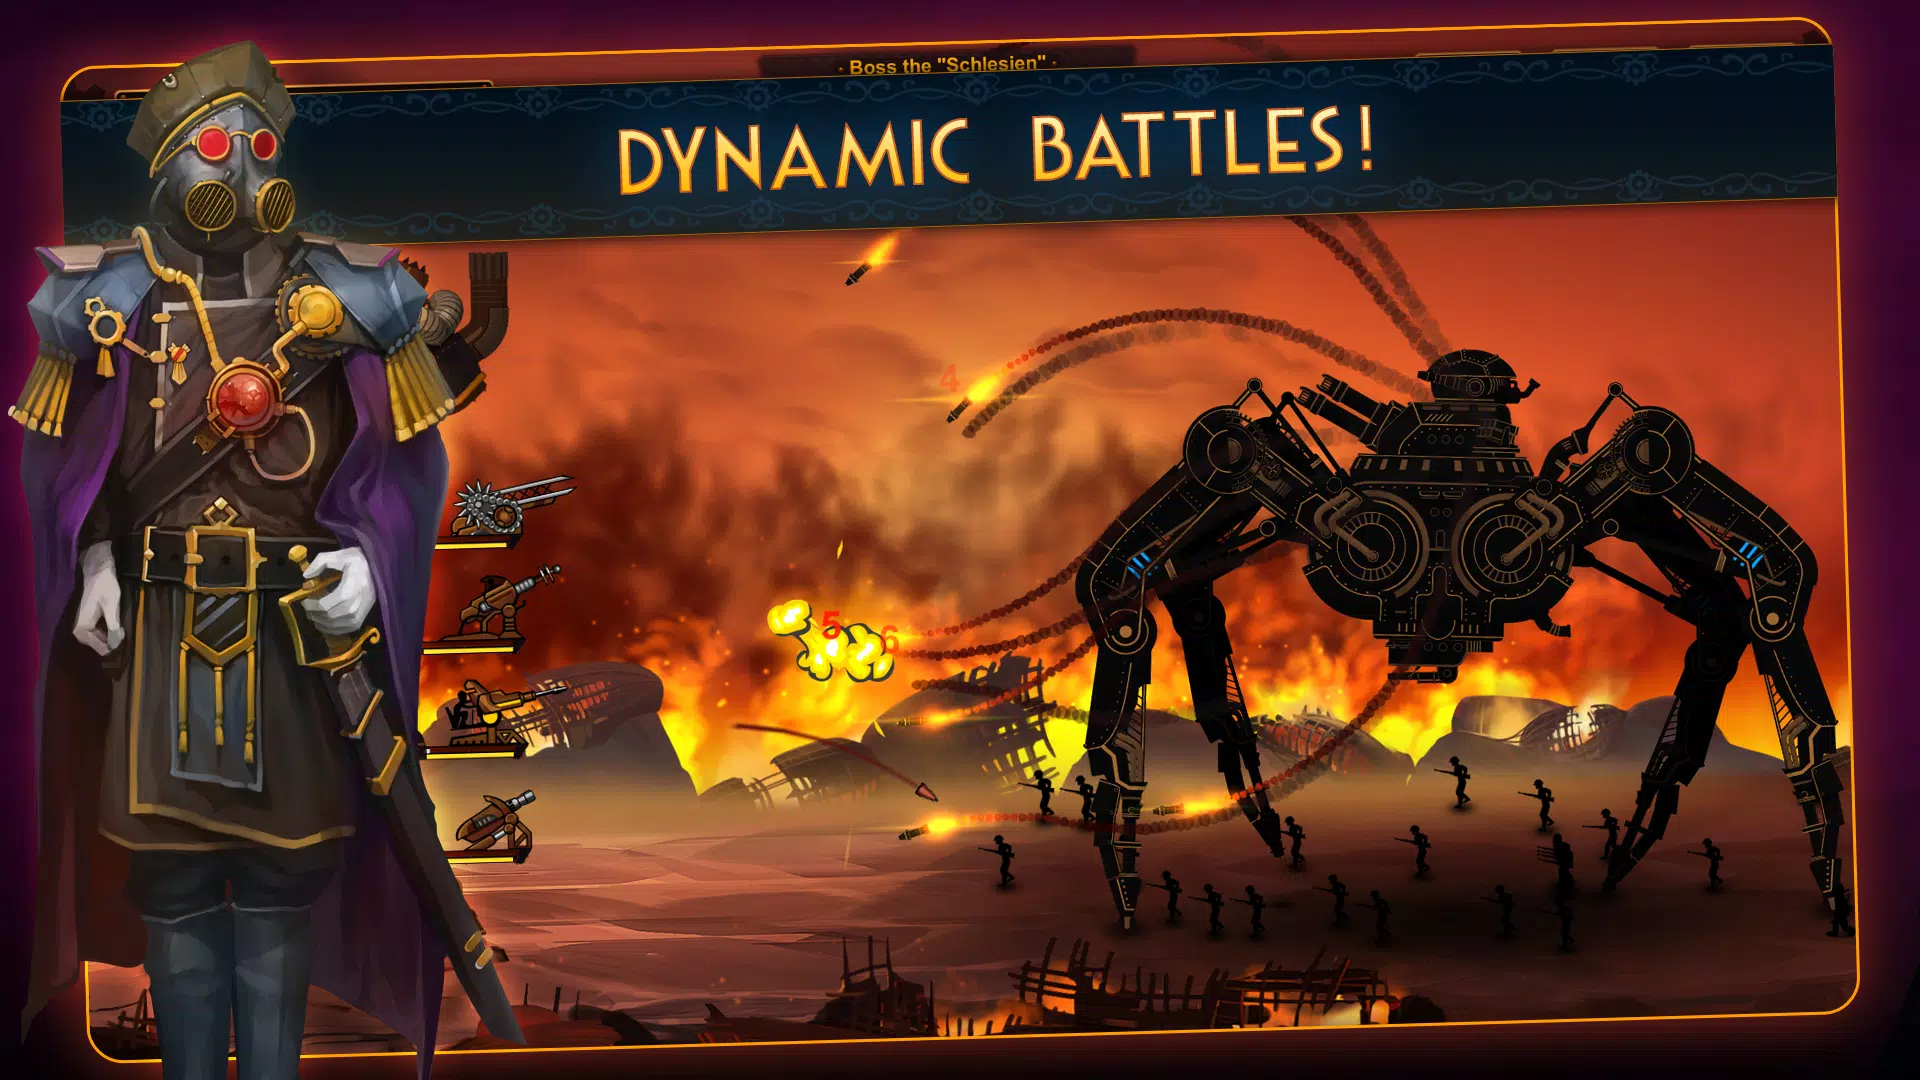 Steampunk Tower Defense for Android - Free App Download